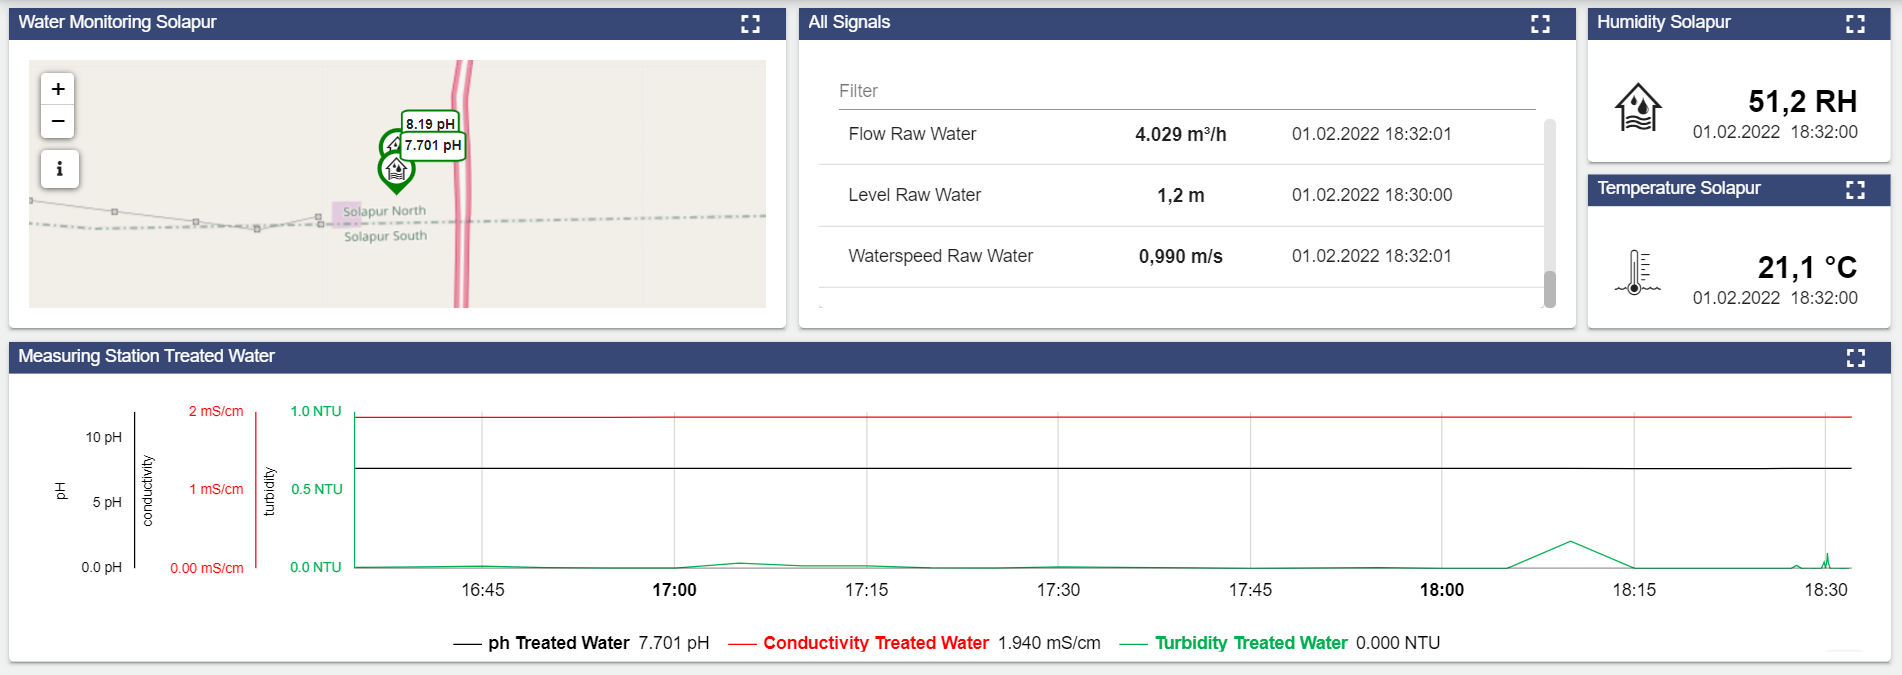 Monitoring dashboard at the Indian drinking water plant in Solapur: data on flow and quality parameters can be viewed at any time via the portal of the German partners.